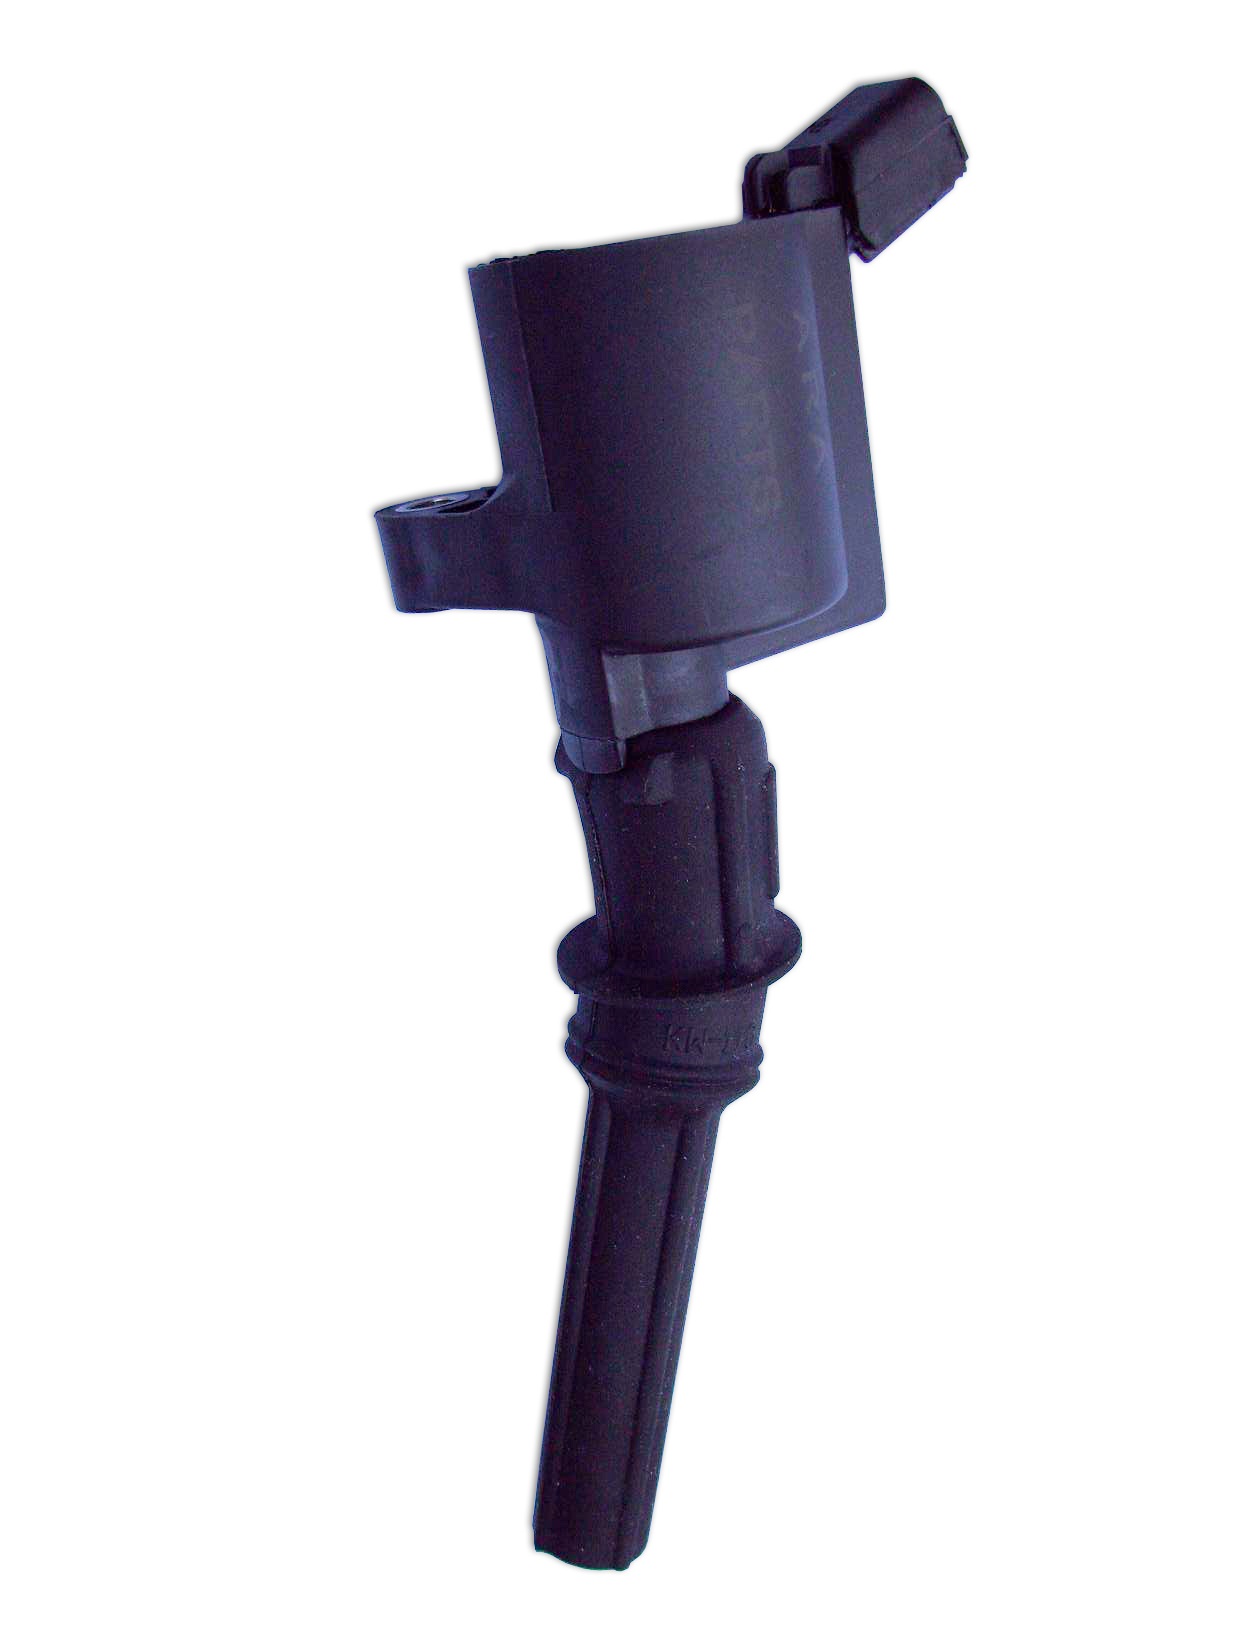 This ignition coil (DG508) fits the 2005 F-150 with the 4.6L V8